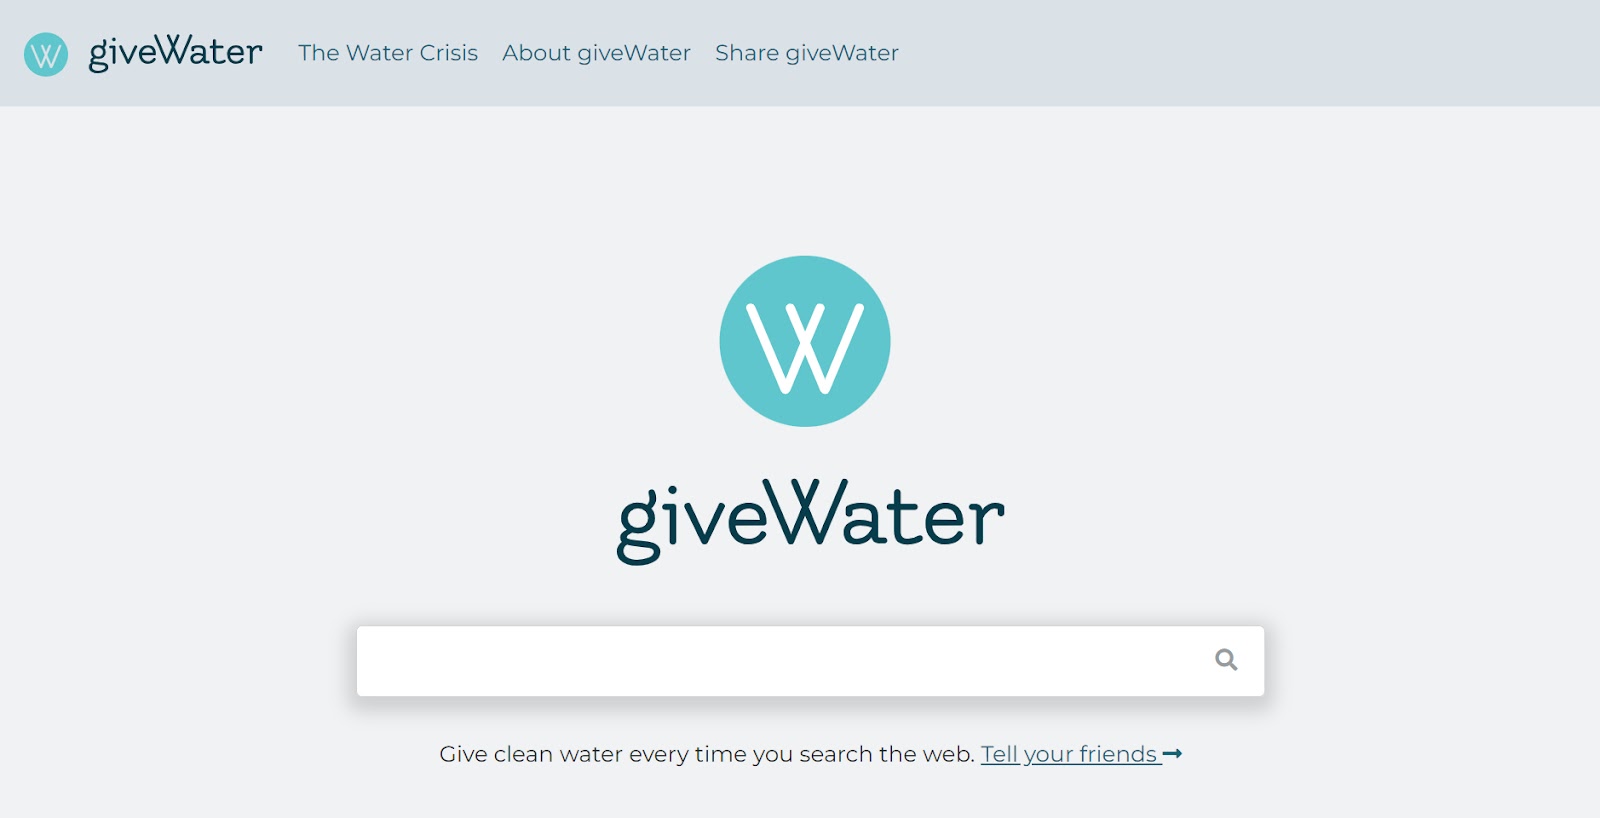 giveWater search engine